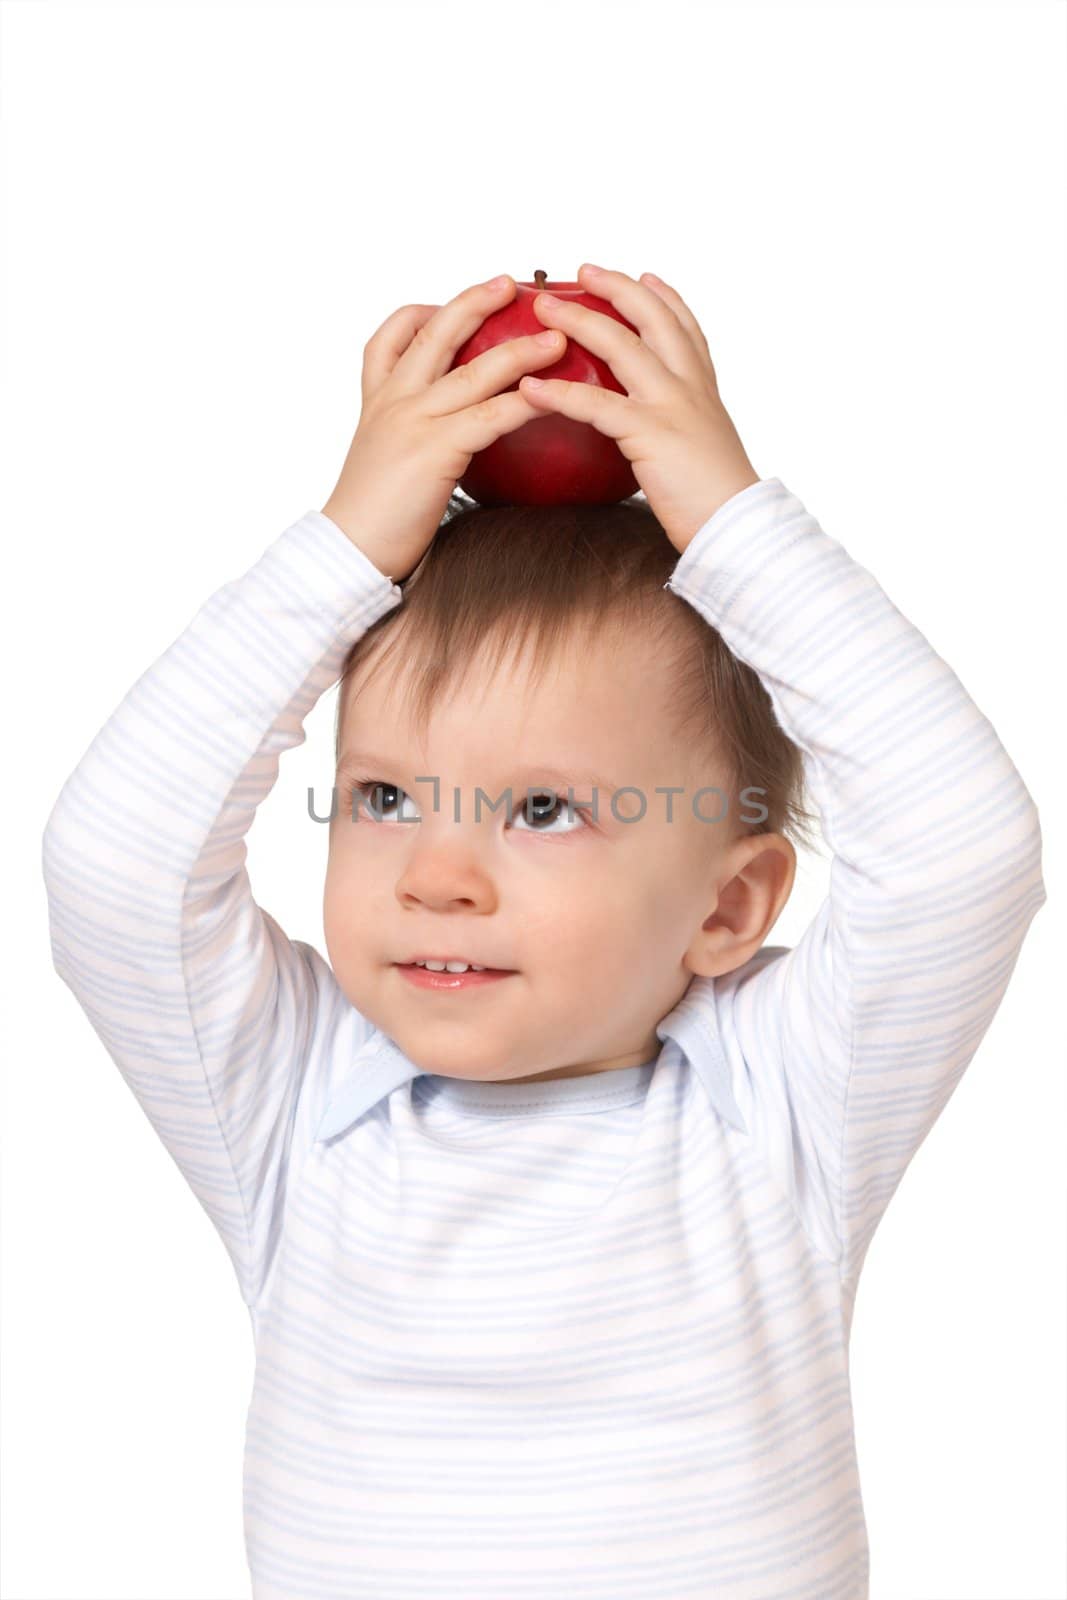 baby with red apple